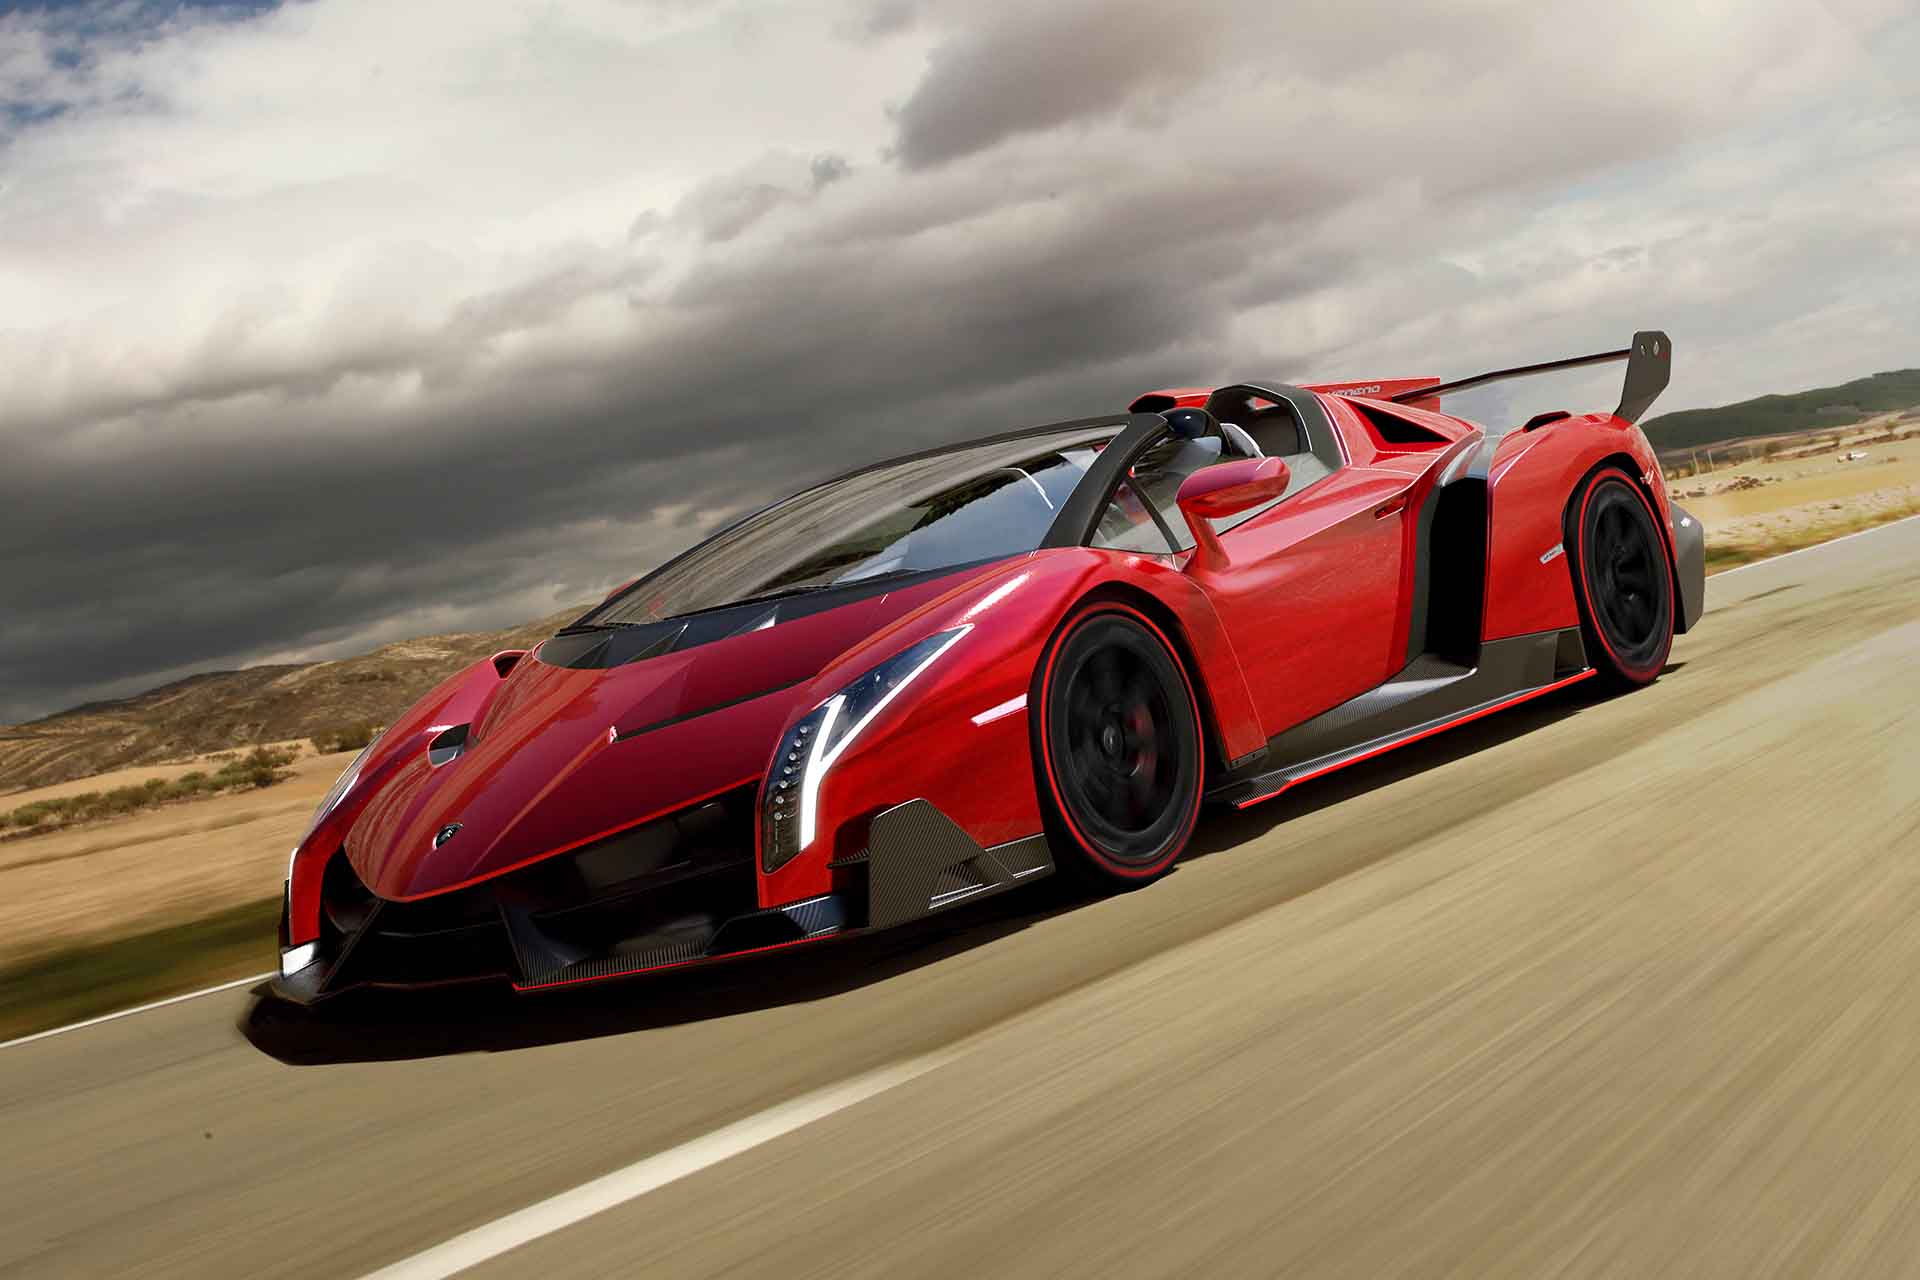 Red Lamborghini Veneno driving fast on a desert road with the top open.